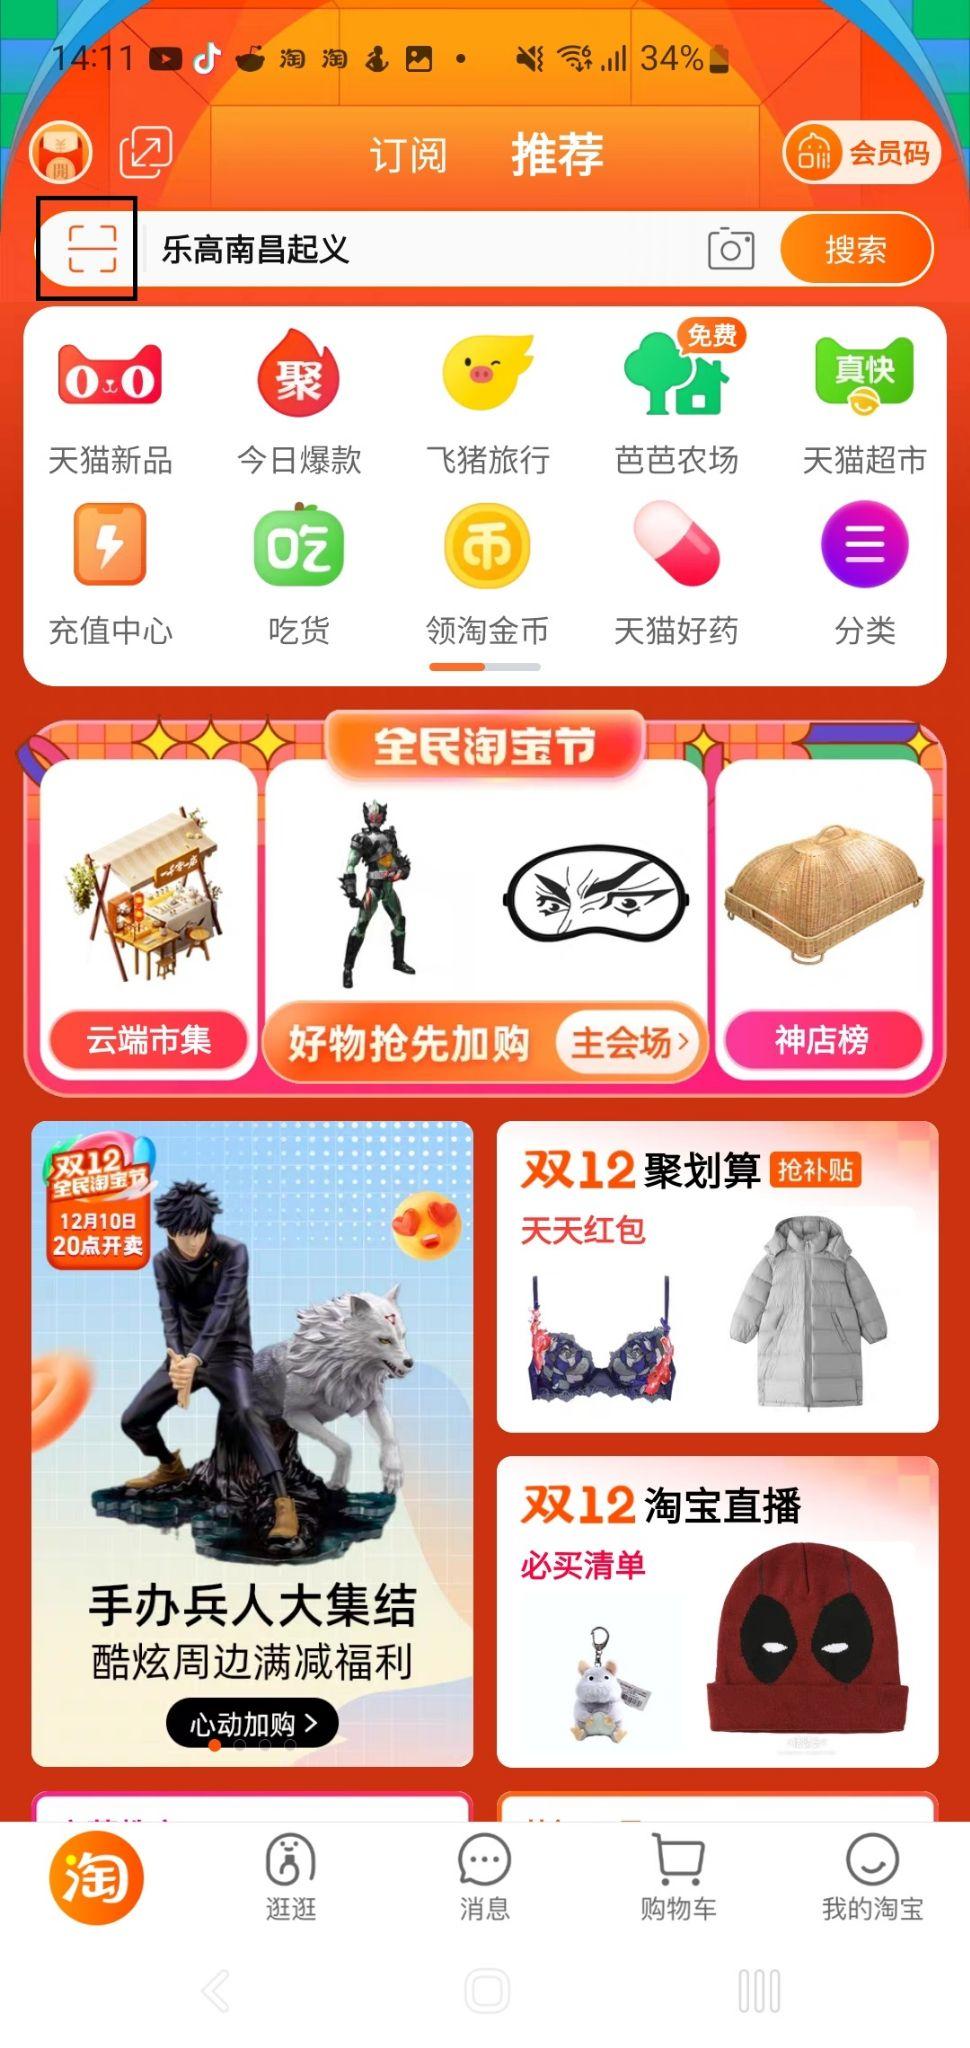 Daily check-in to collect Taobao coins